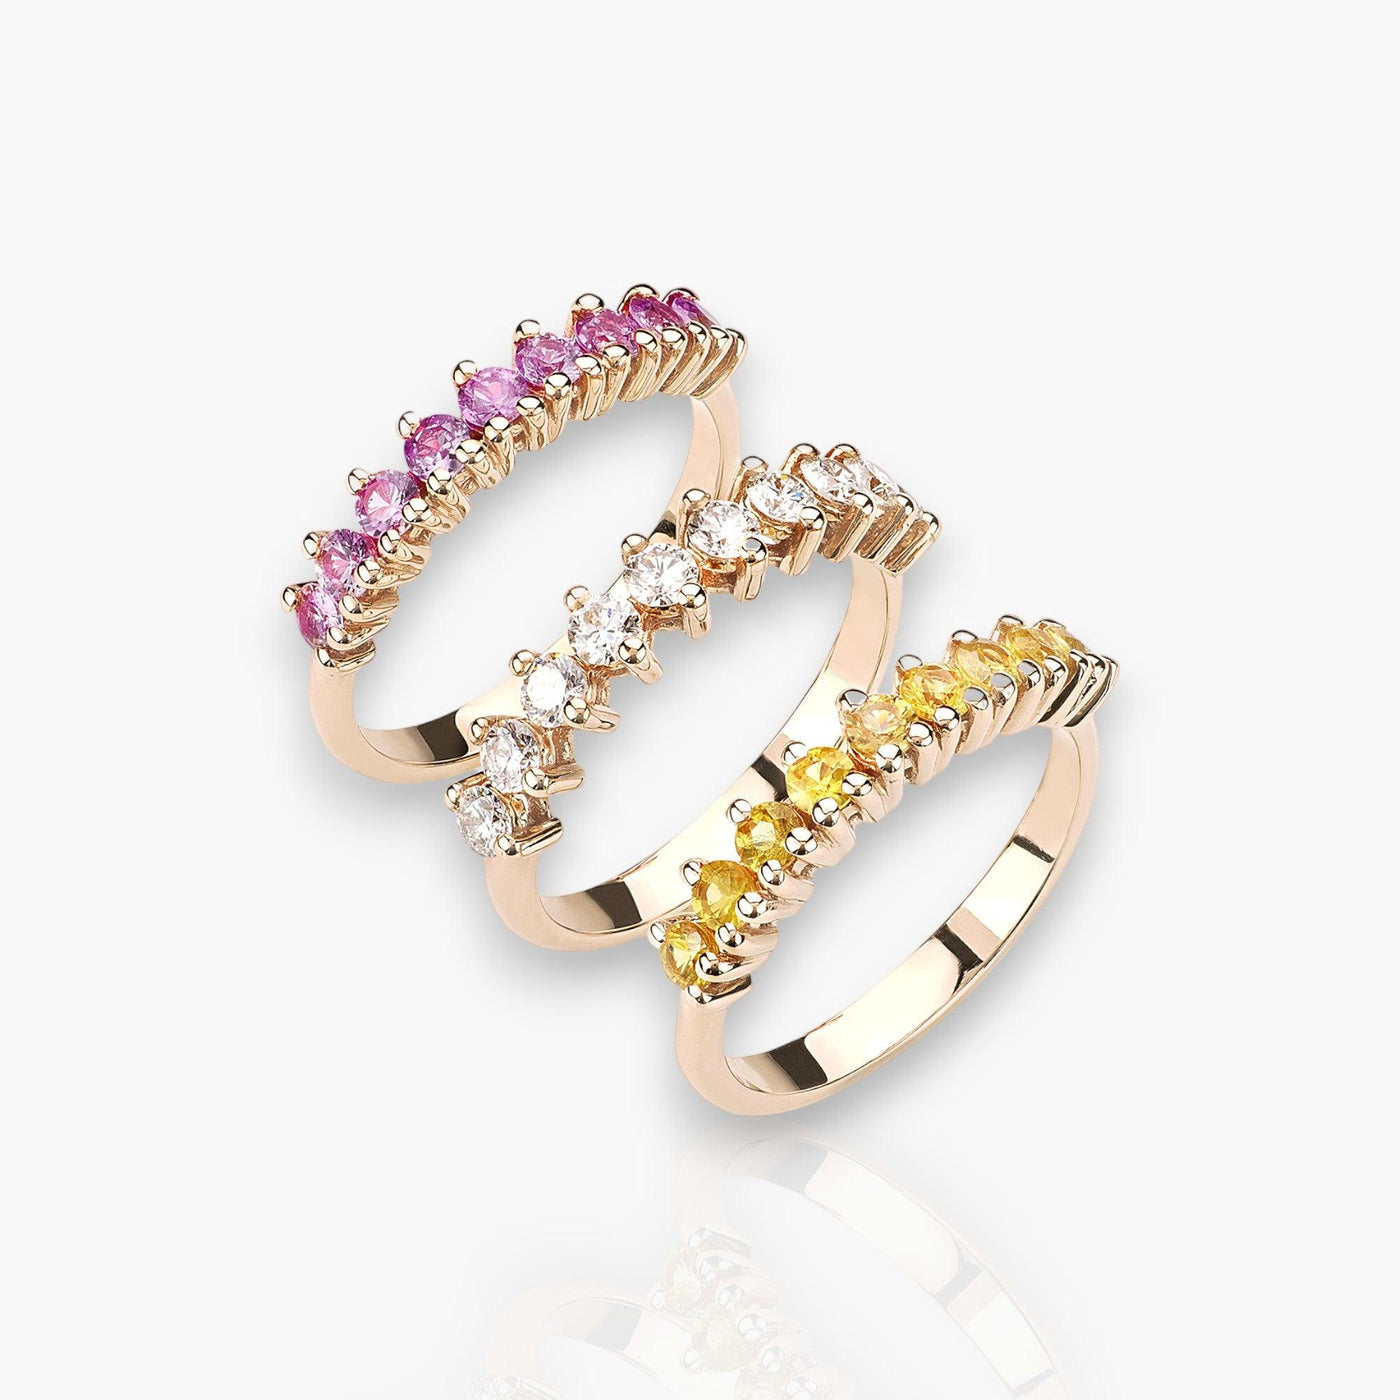 Riviera Ring in Rose Golds With Pink Sapphires - Moregola Fine Jewelry